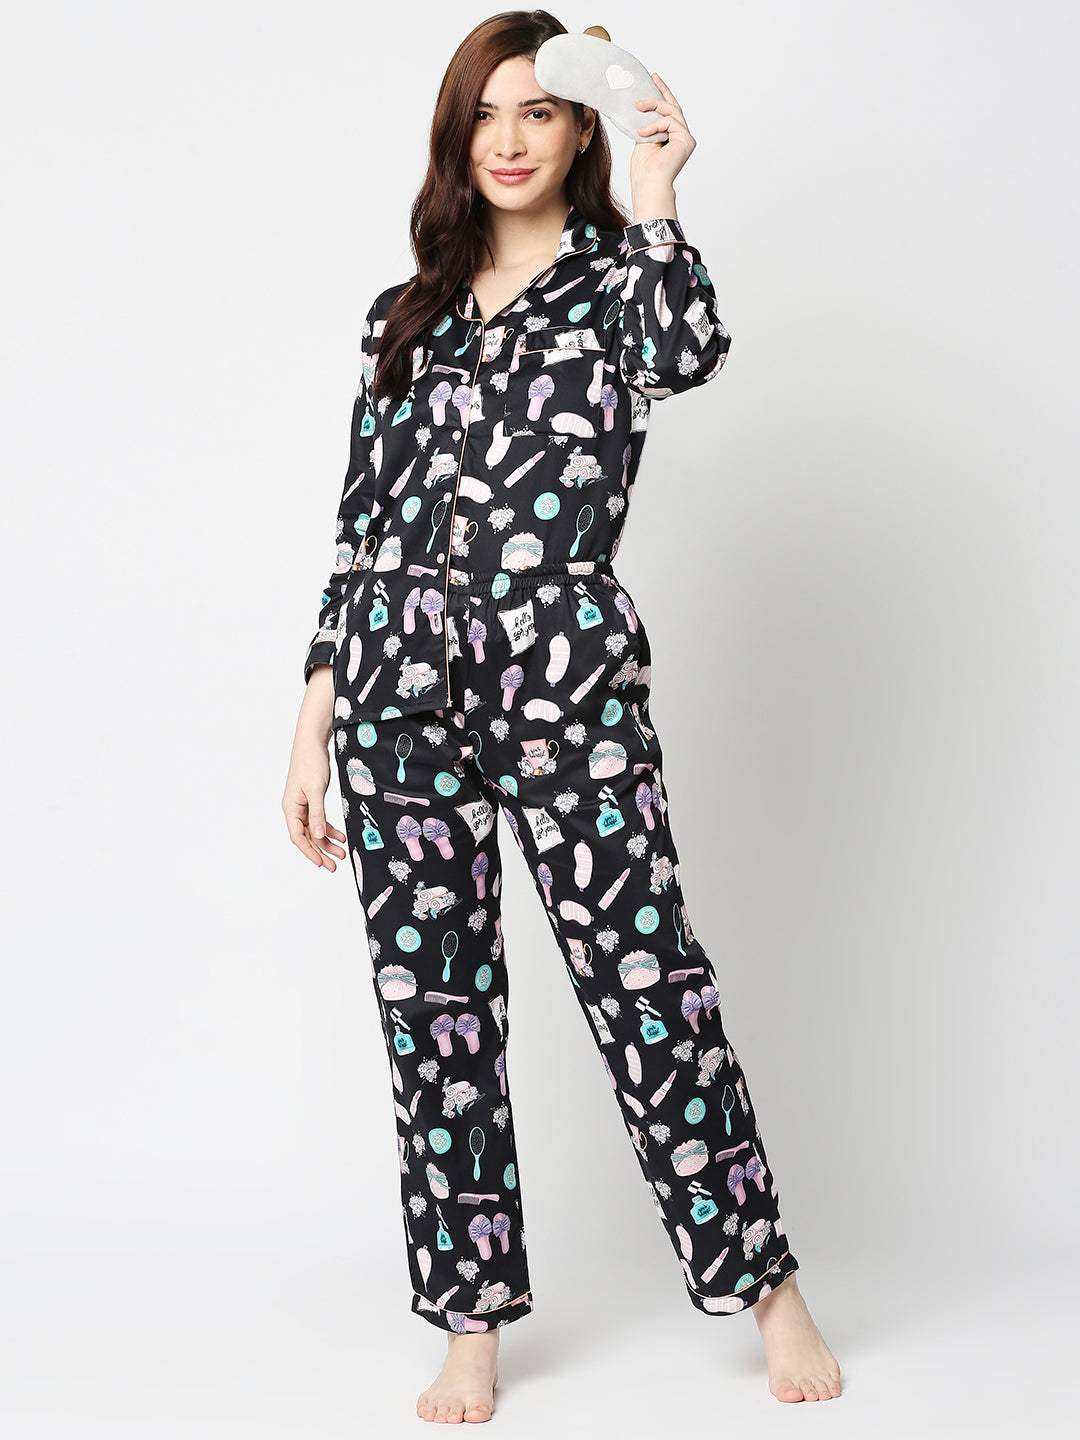 Spa Time Button Down Pj Set - Pure Cotton Pj Set with Notched Collar